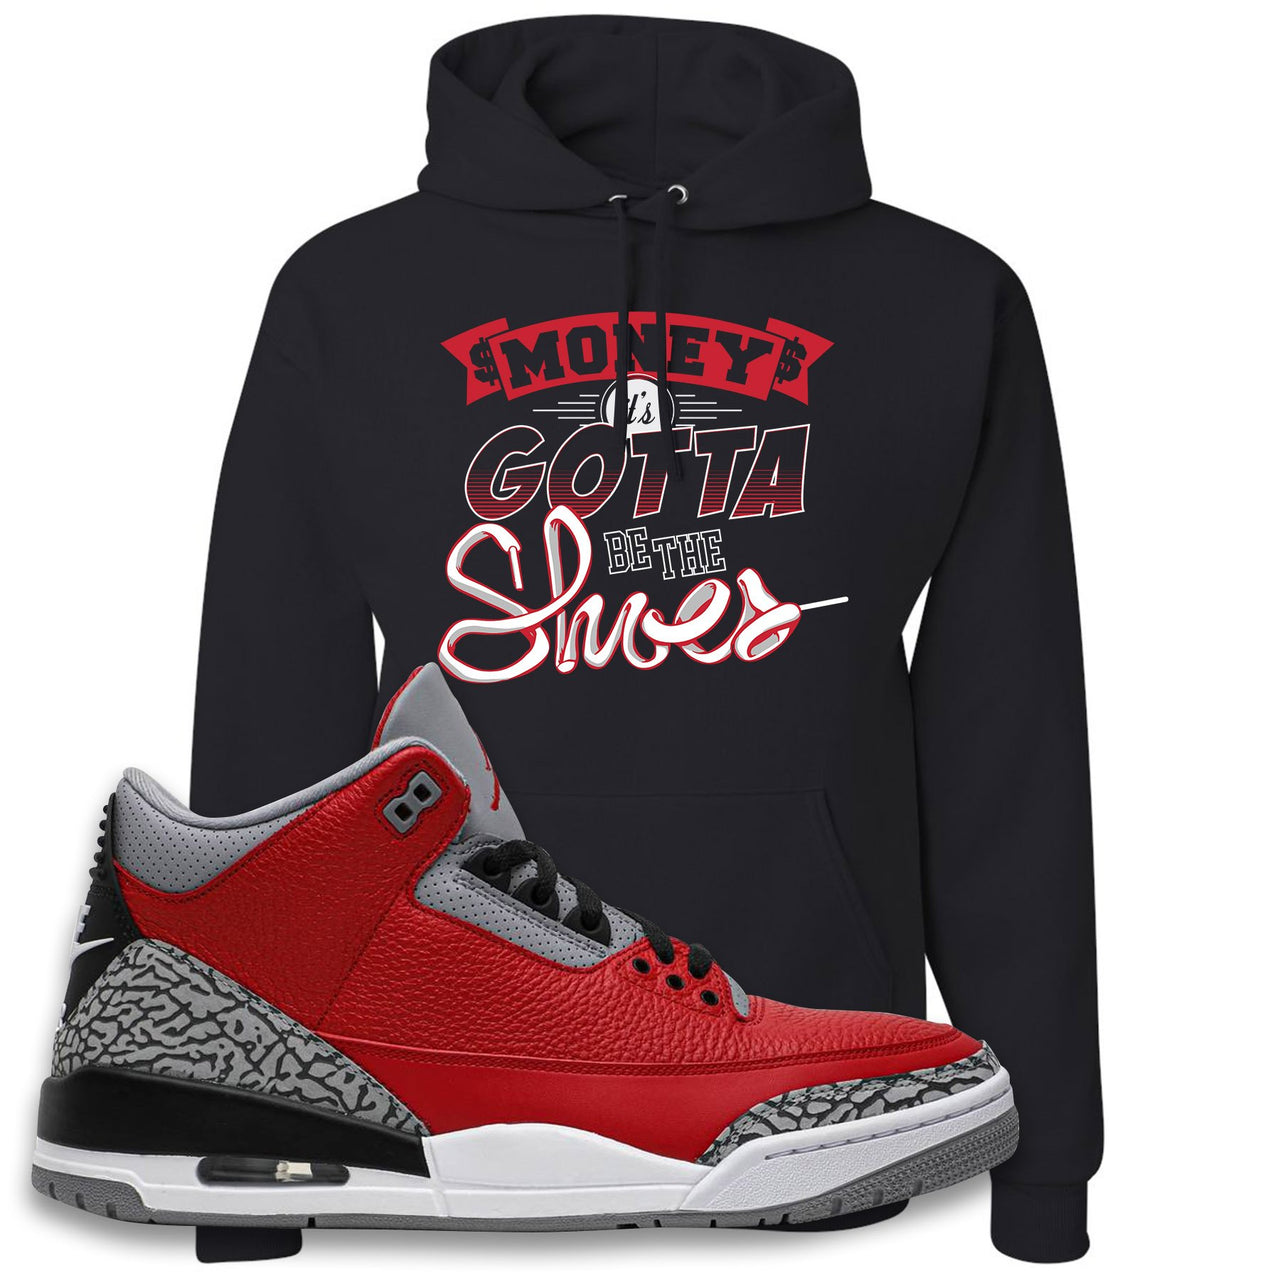 Jordan 3 Red Cement Chicago All-Star Sneaker Black Pullover Hoodie | Hoodie to match Jordan 3 All Star Red Cement Shoes | Money Its The Shoes